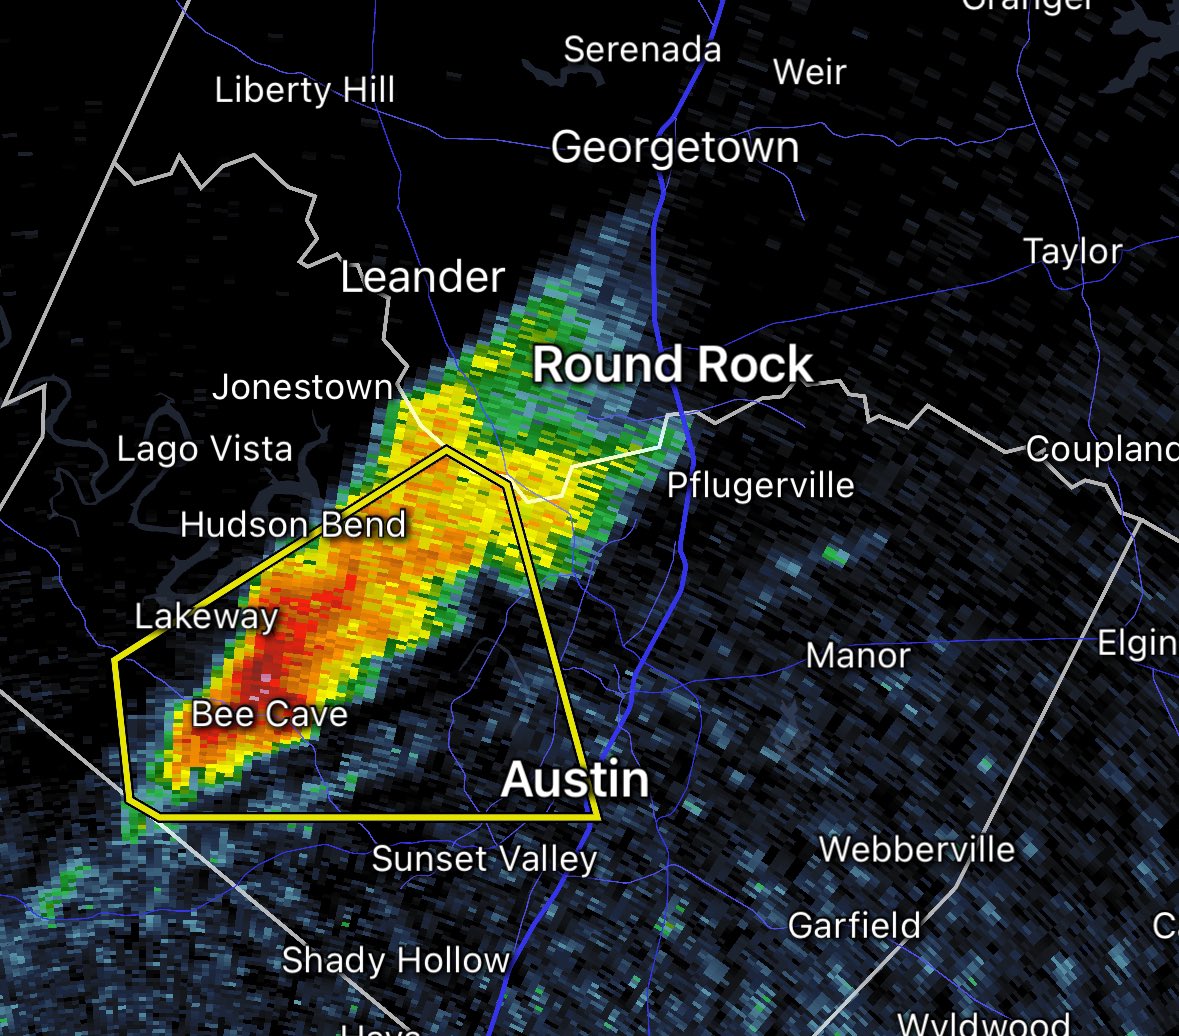 SEVERE THUNDERSTORM WARNING until 5:15 PM West Travis County, near Bee Cave and Lakeway. Large hail possible 60+ mph winds